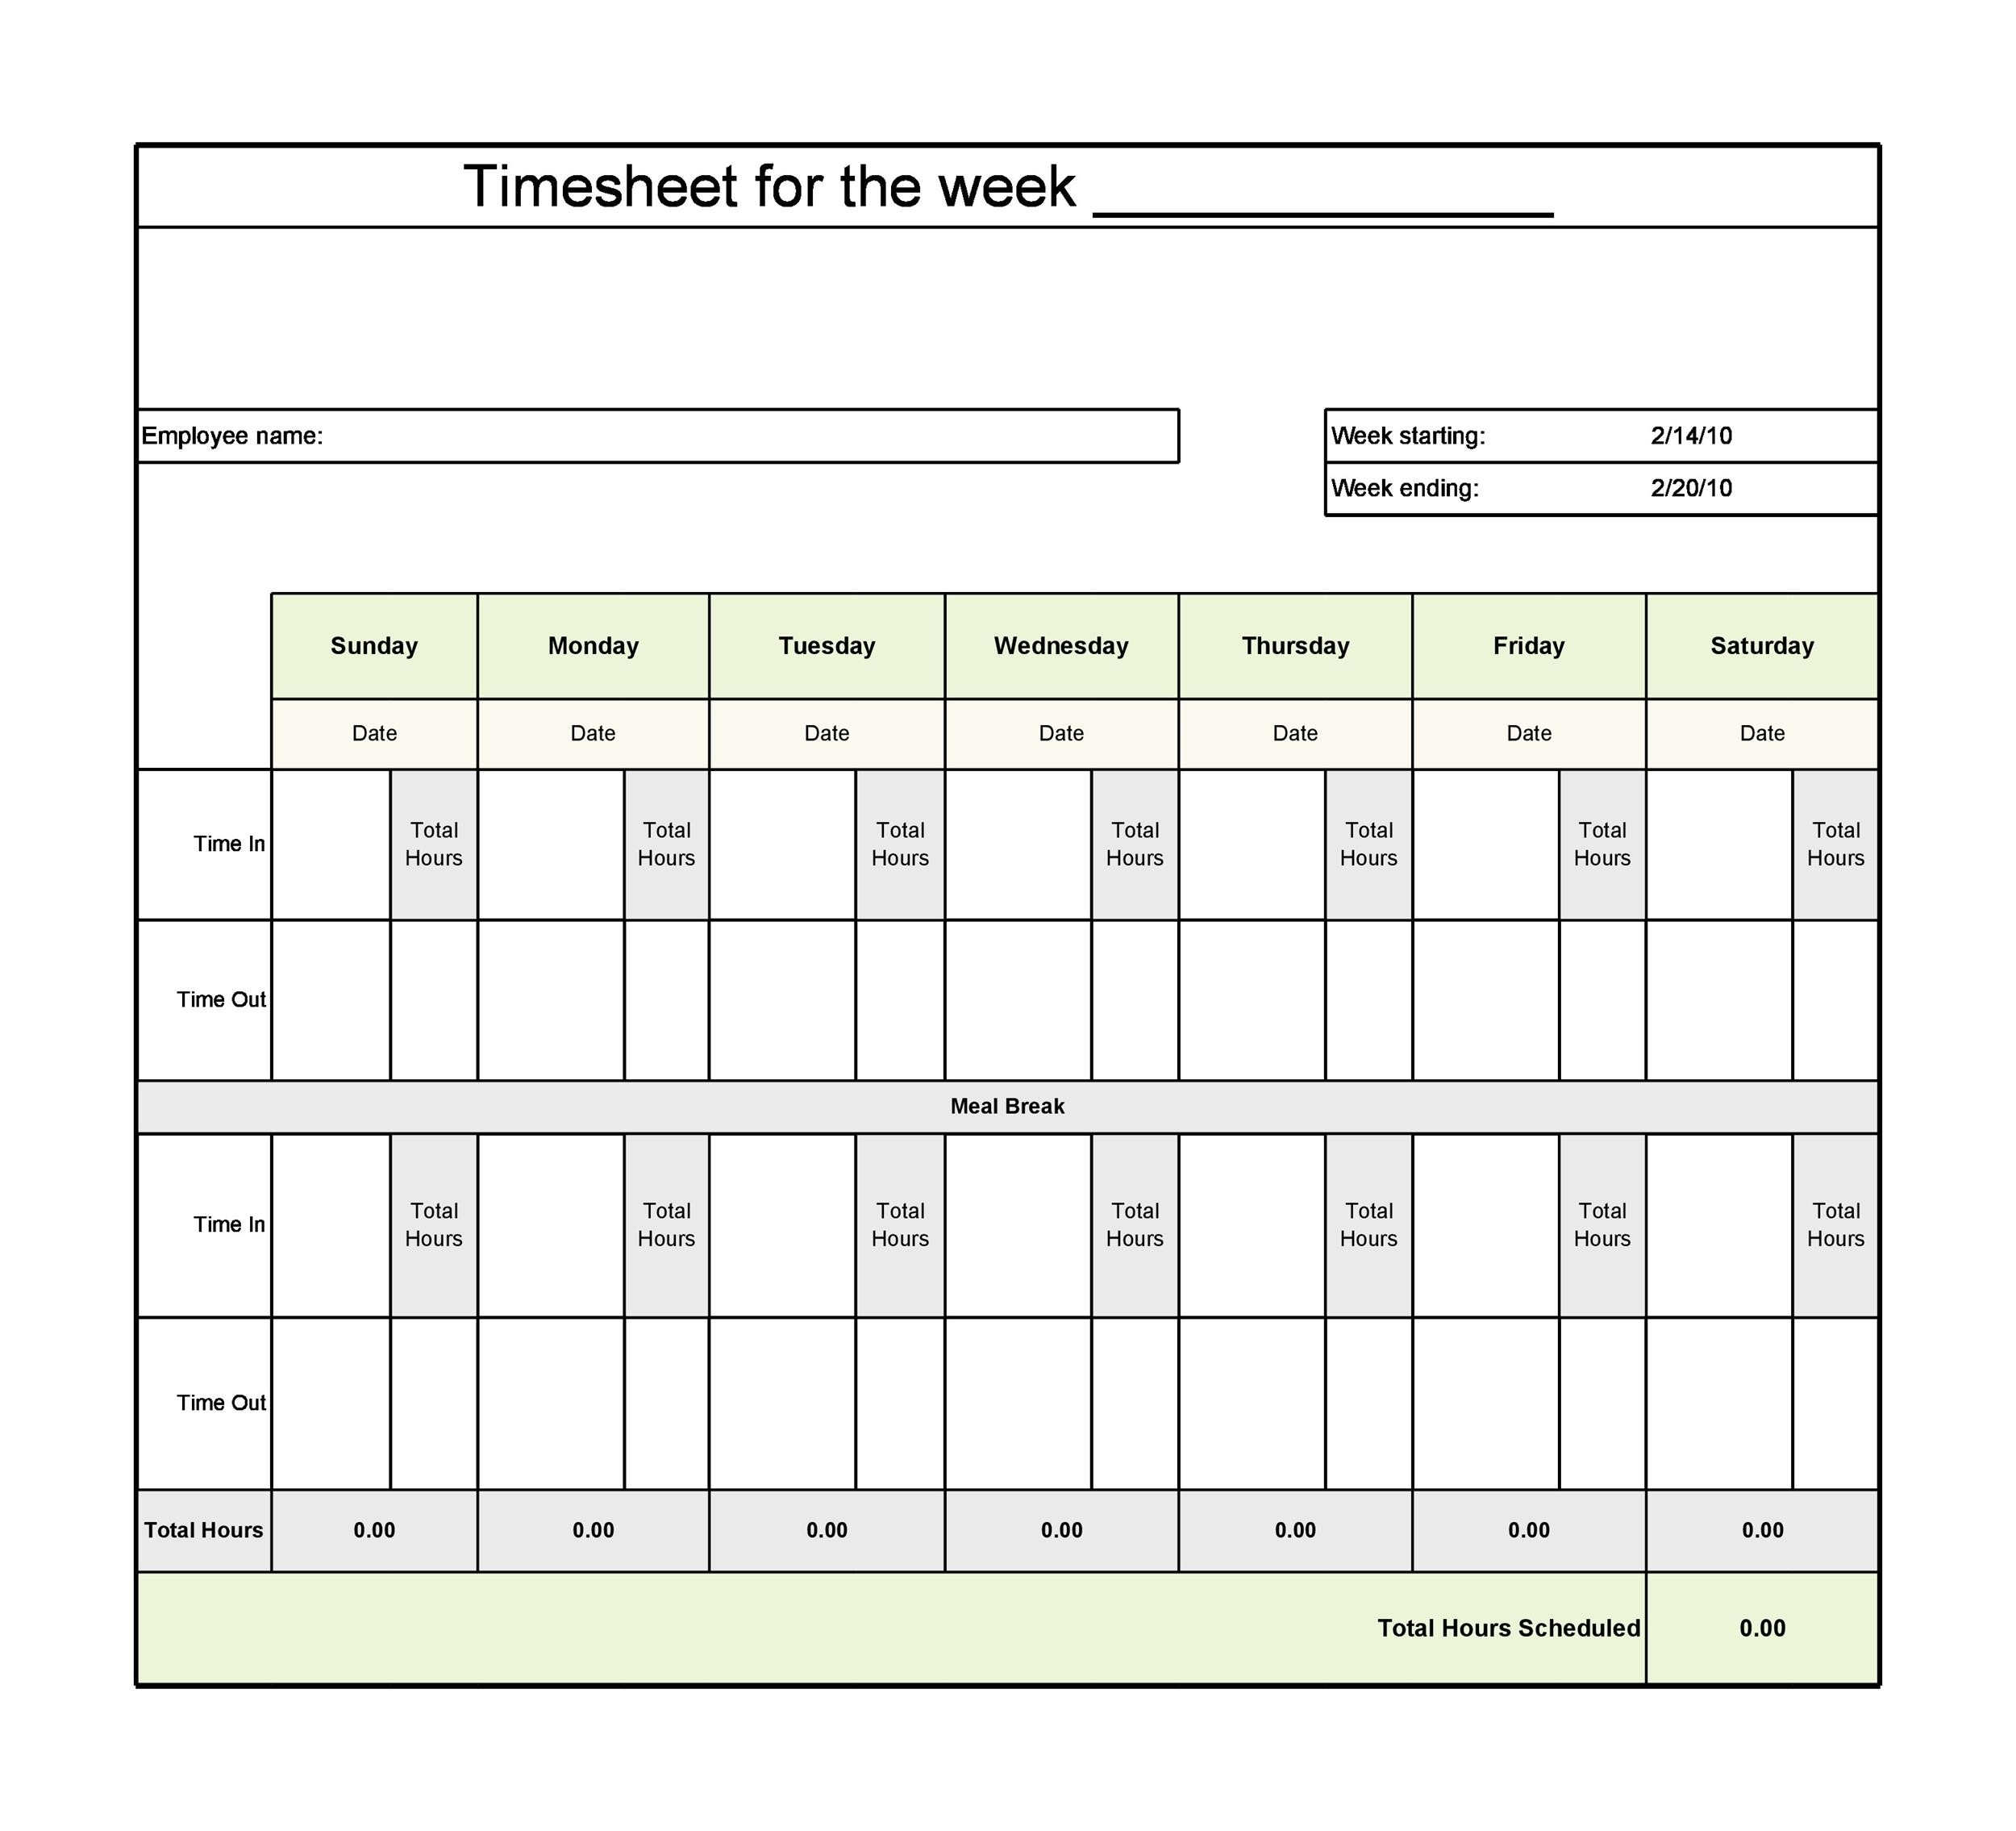 40 Free Timesheet / Time Card Templates - Template Lab With Regard To Weekly Time Card Template Free